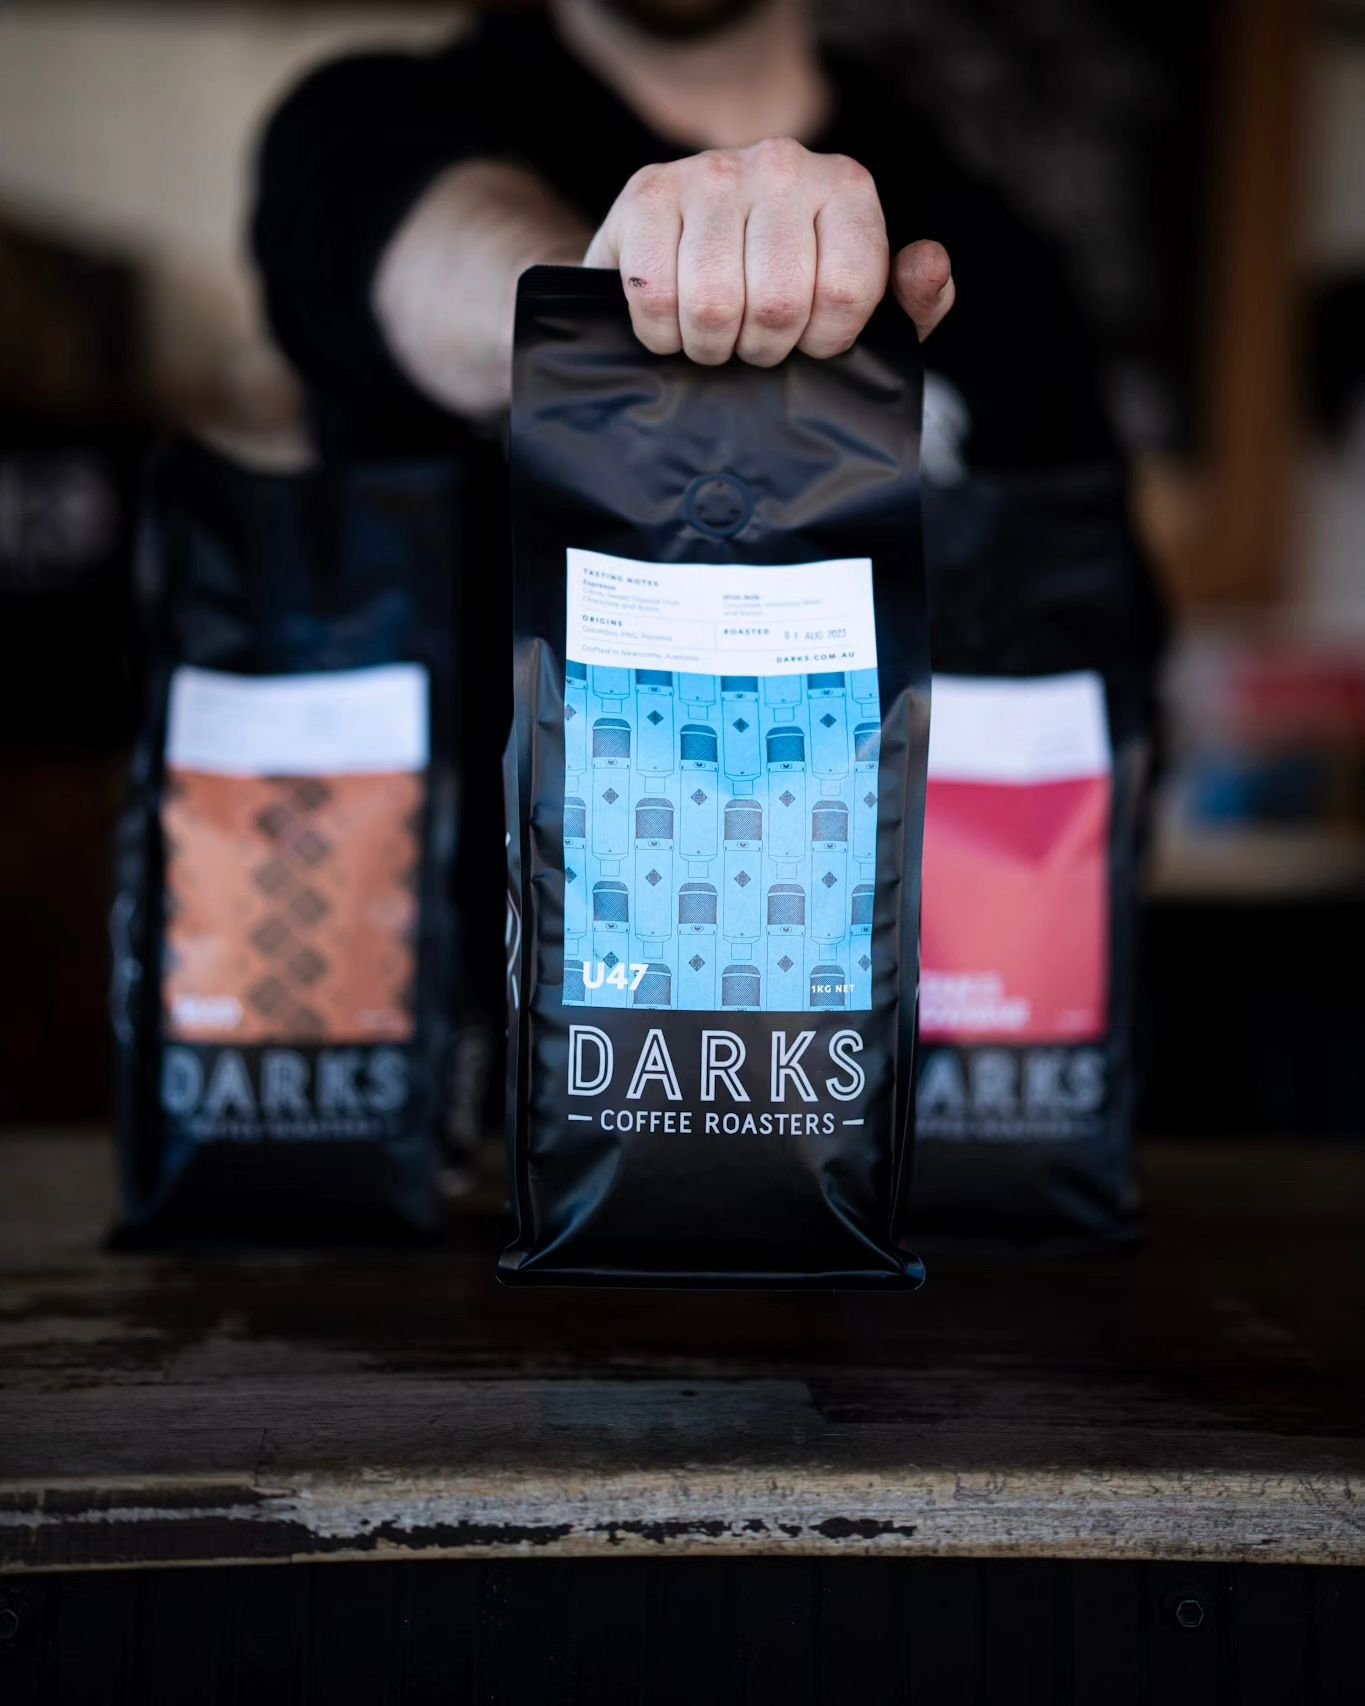 Craving the Darks taste at home? 

Order your preferred roast online and set your pick to The Container or feel free to drop in to check out what&rsquo;s available ☕️

Head to our website to order or find us at The McDonald&rsquo;s Jones Stadium Carp